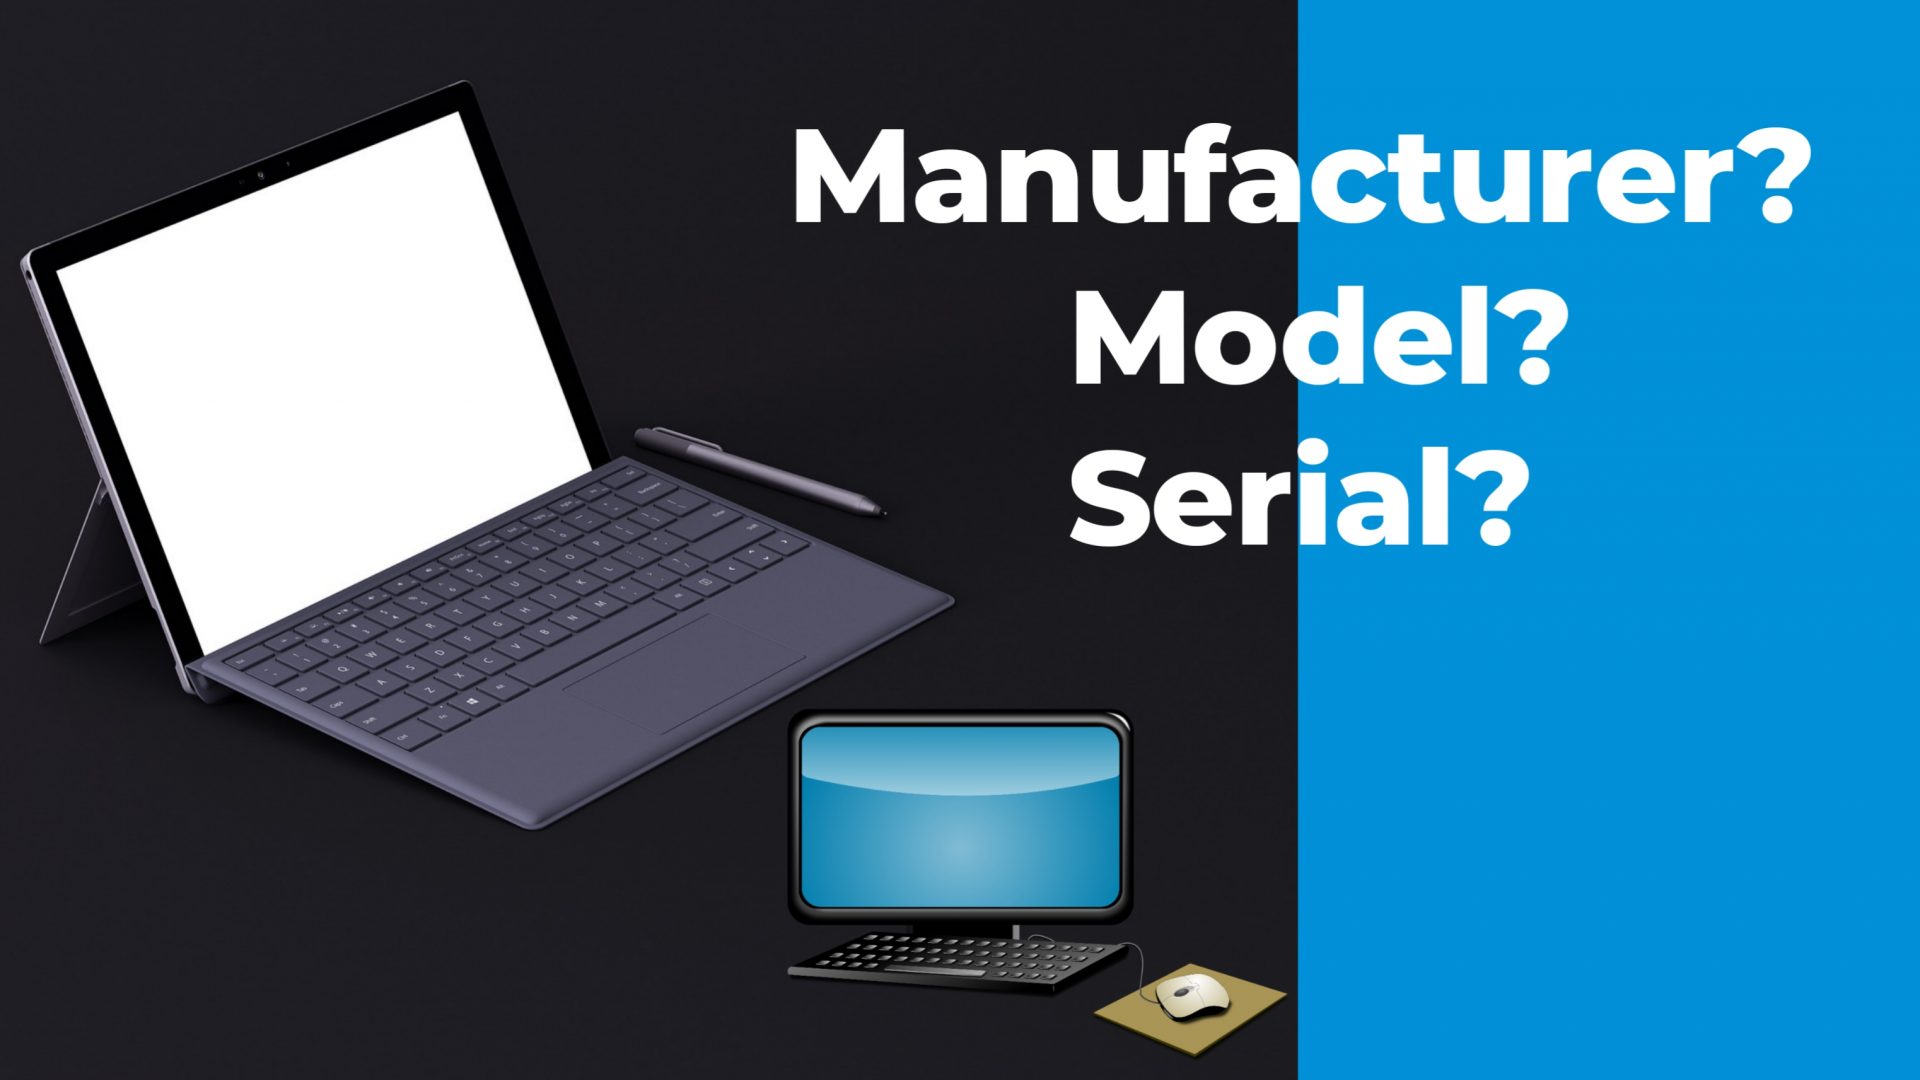 How to Find Computer Model, Serial & Manufacturer